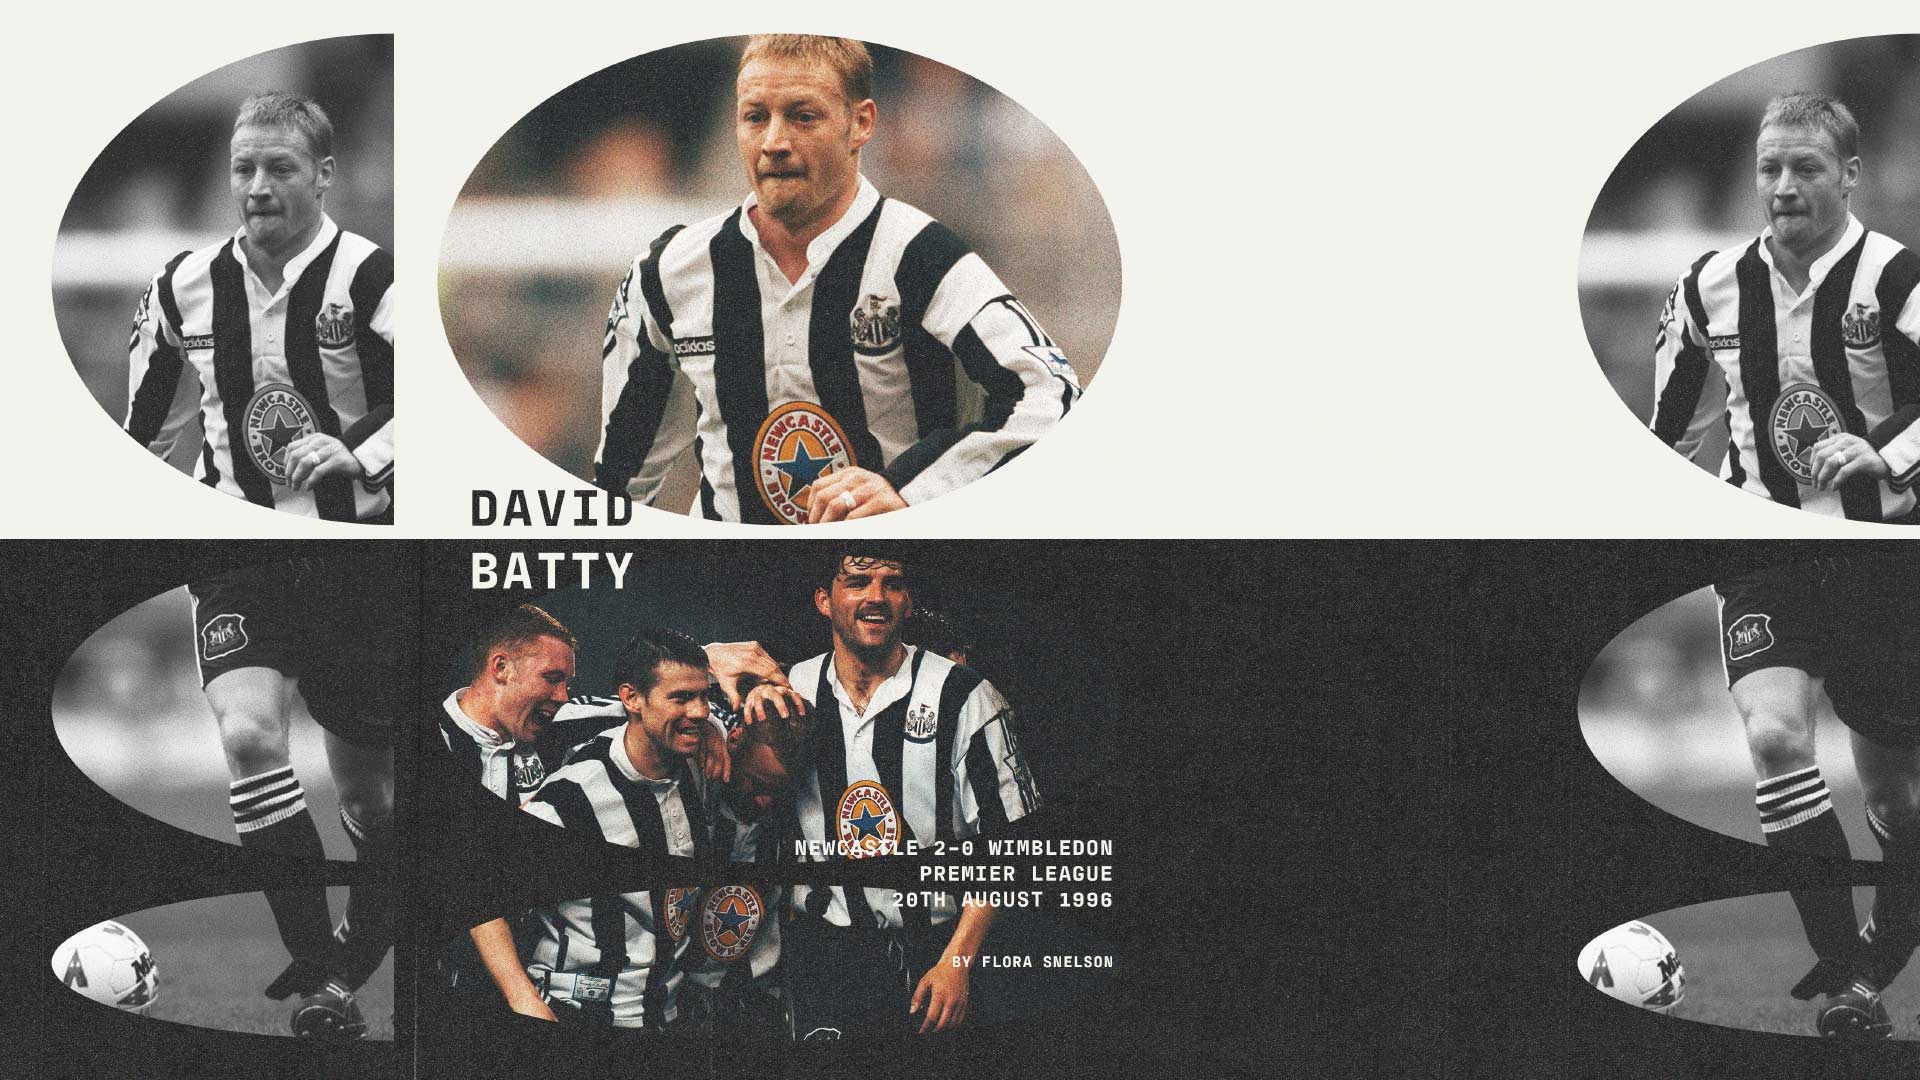 Newcastle players mobbing David Batty after he lobbed Neil Sullivan from 35 yards. Honestly, it happened